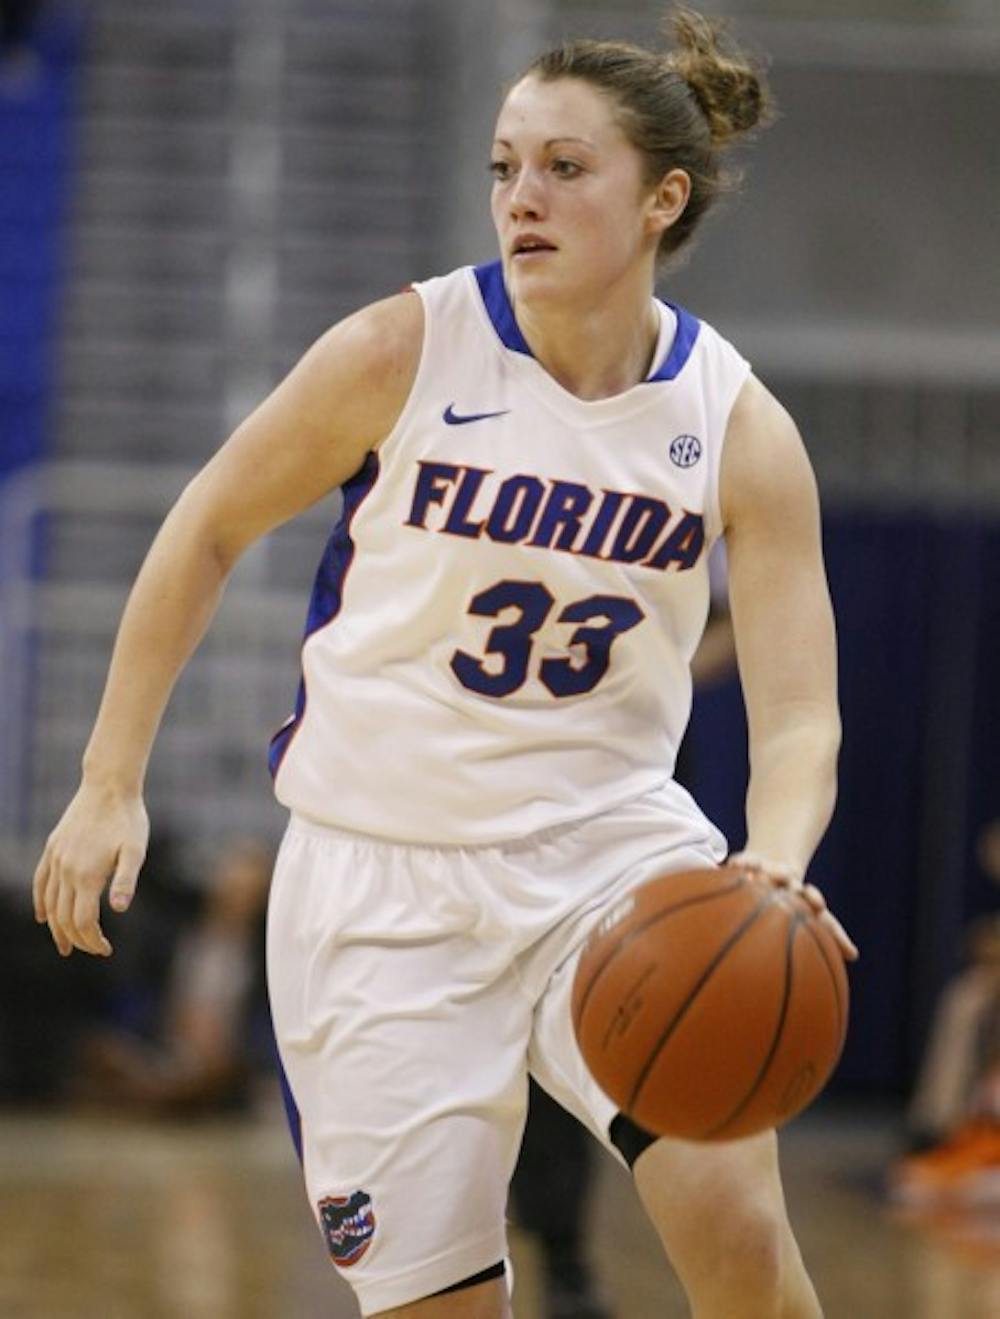 <p>Florida senior guard Jordan Jones is setting career-highs in points per game and shooting percentage, but she has been slumping of late.</p>